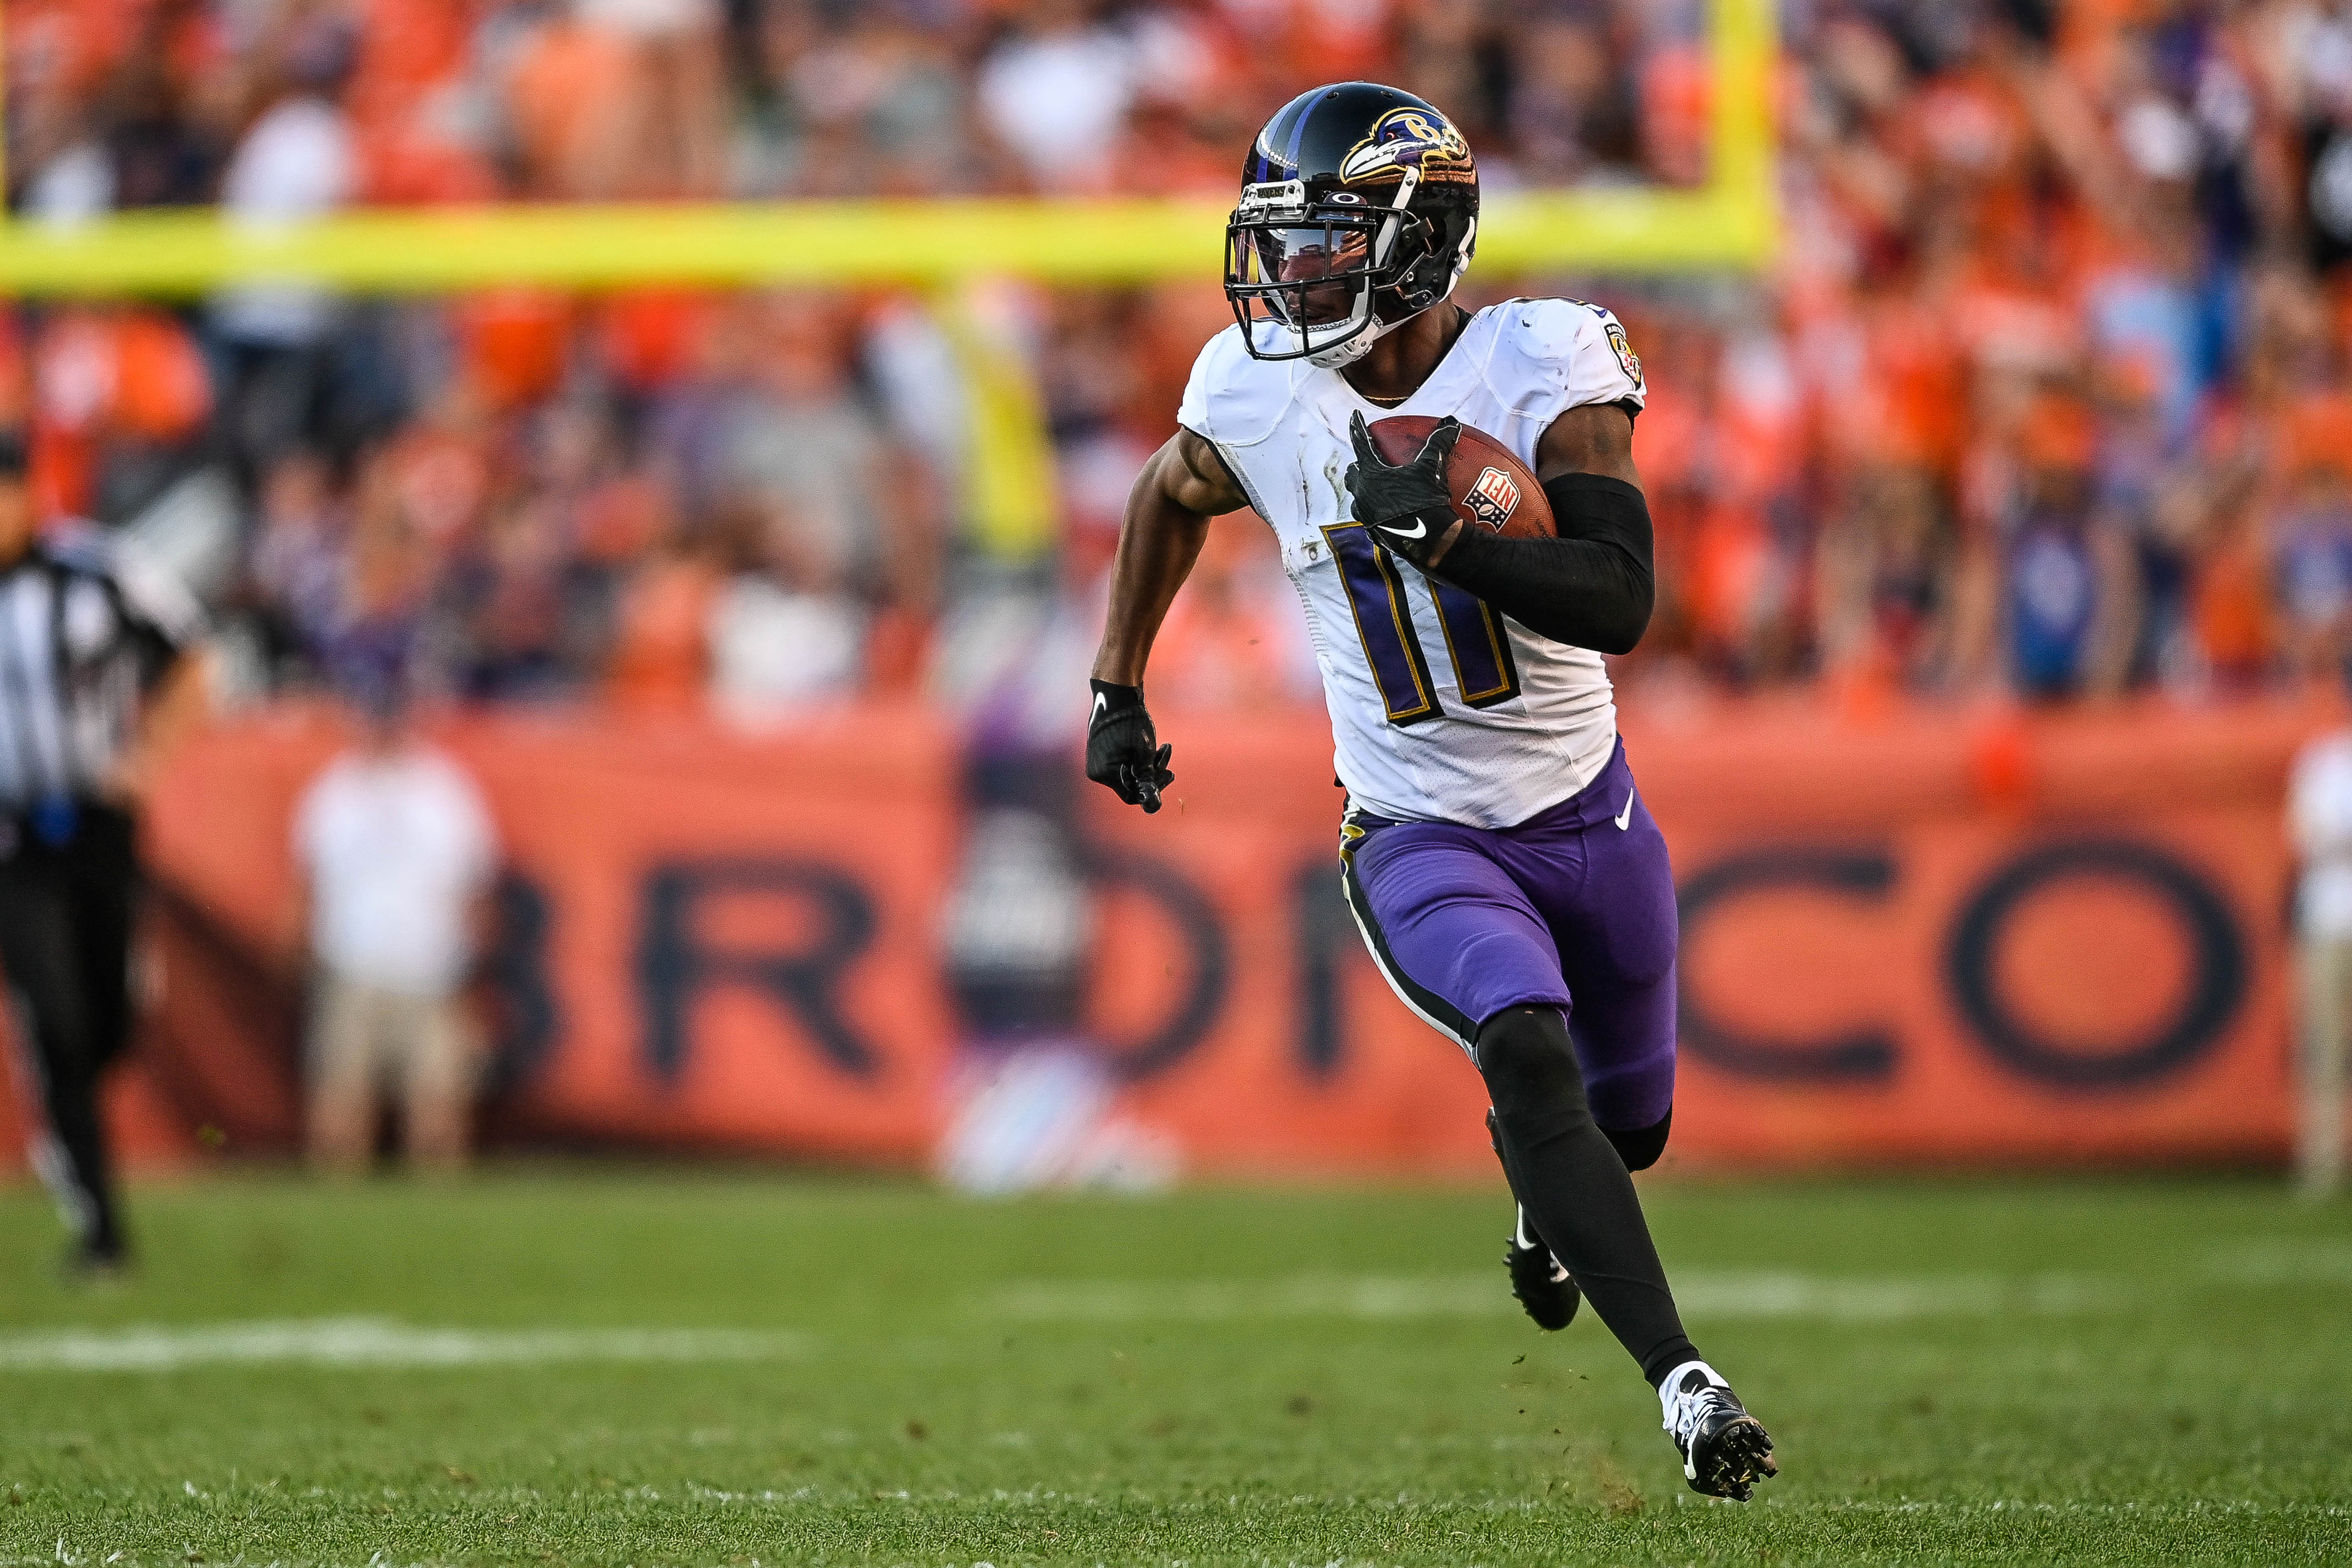 Ravens wide receiver James Proche II catches pass from Lamar Jackson